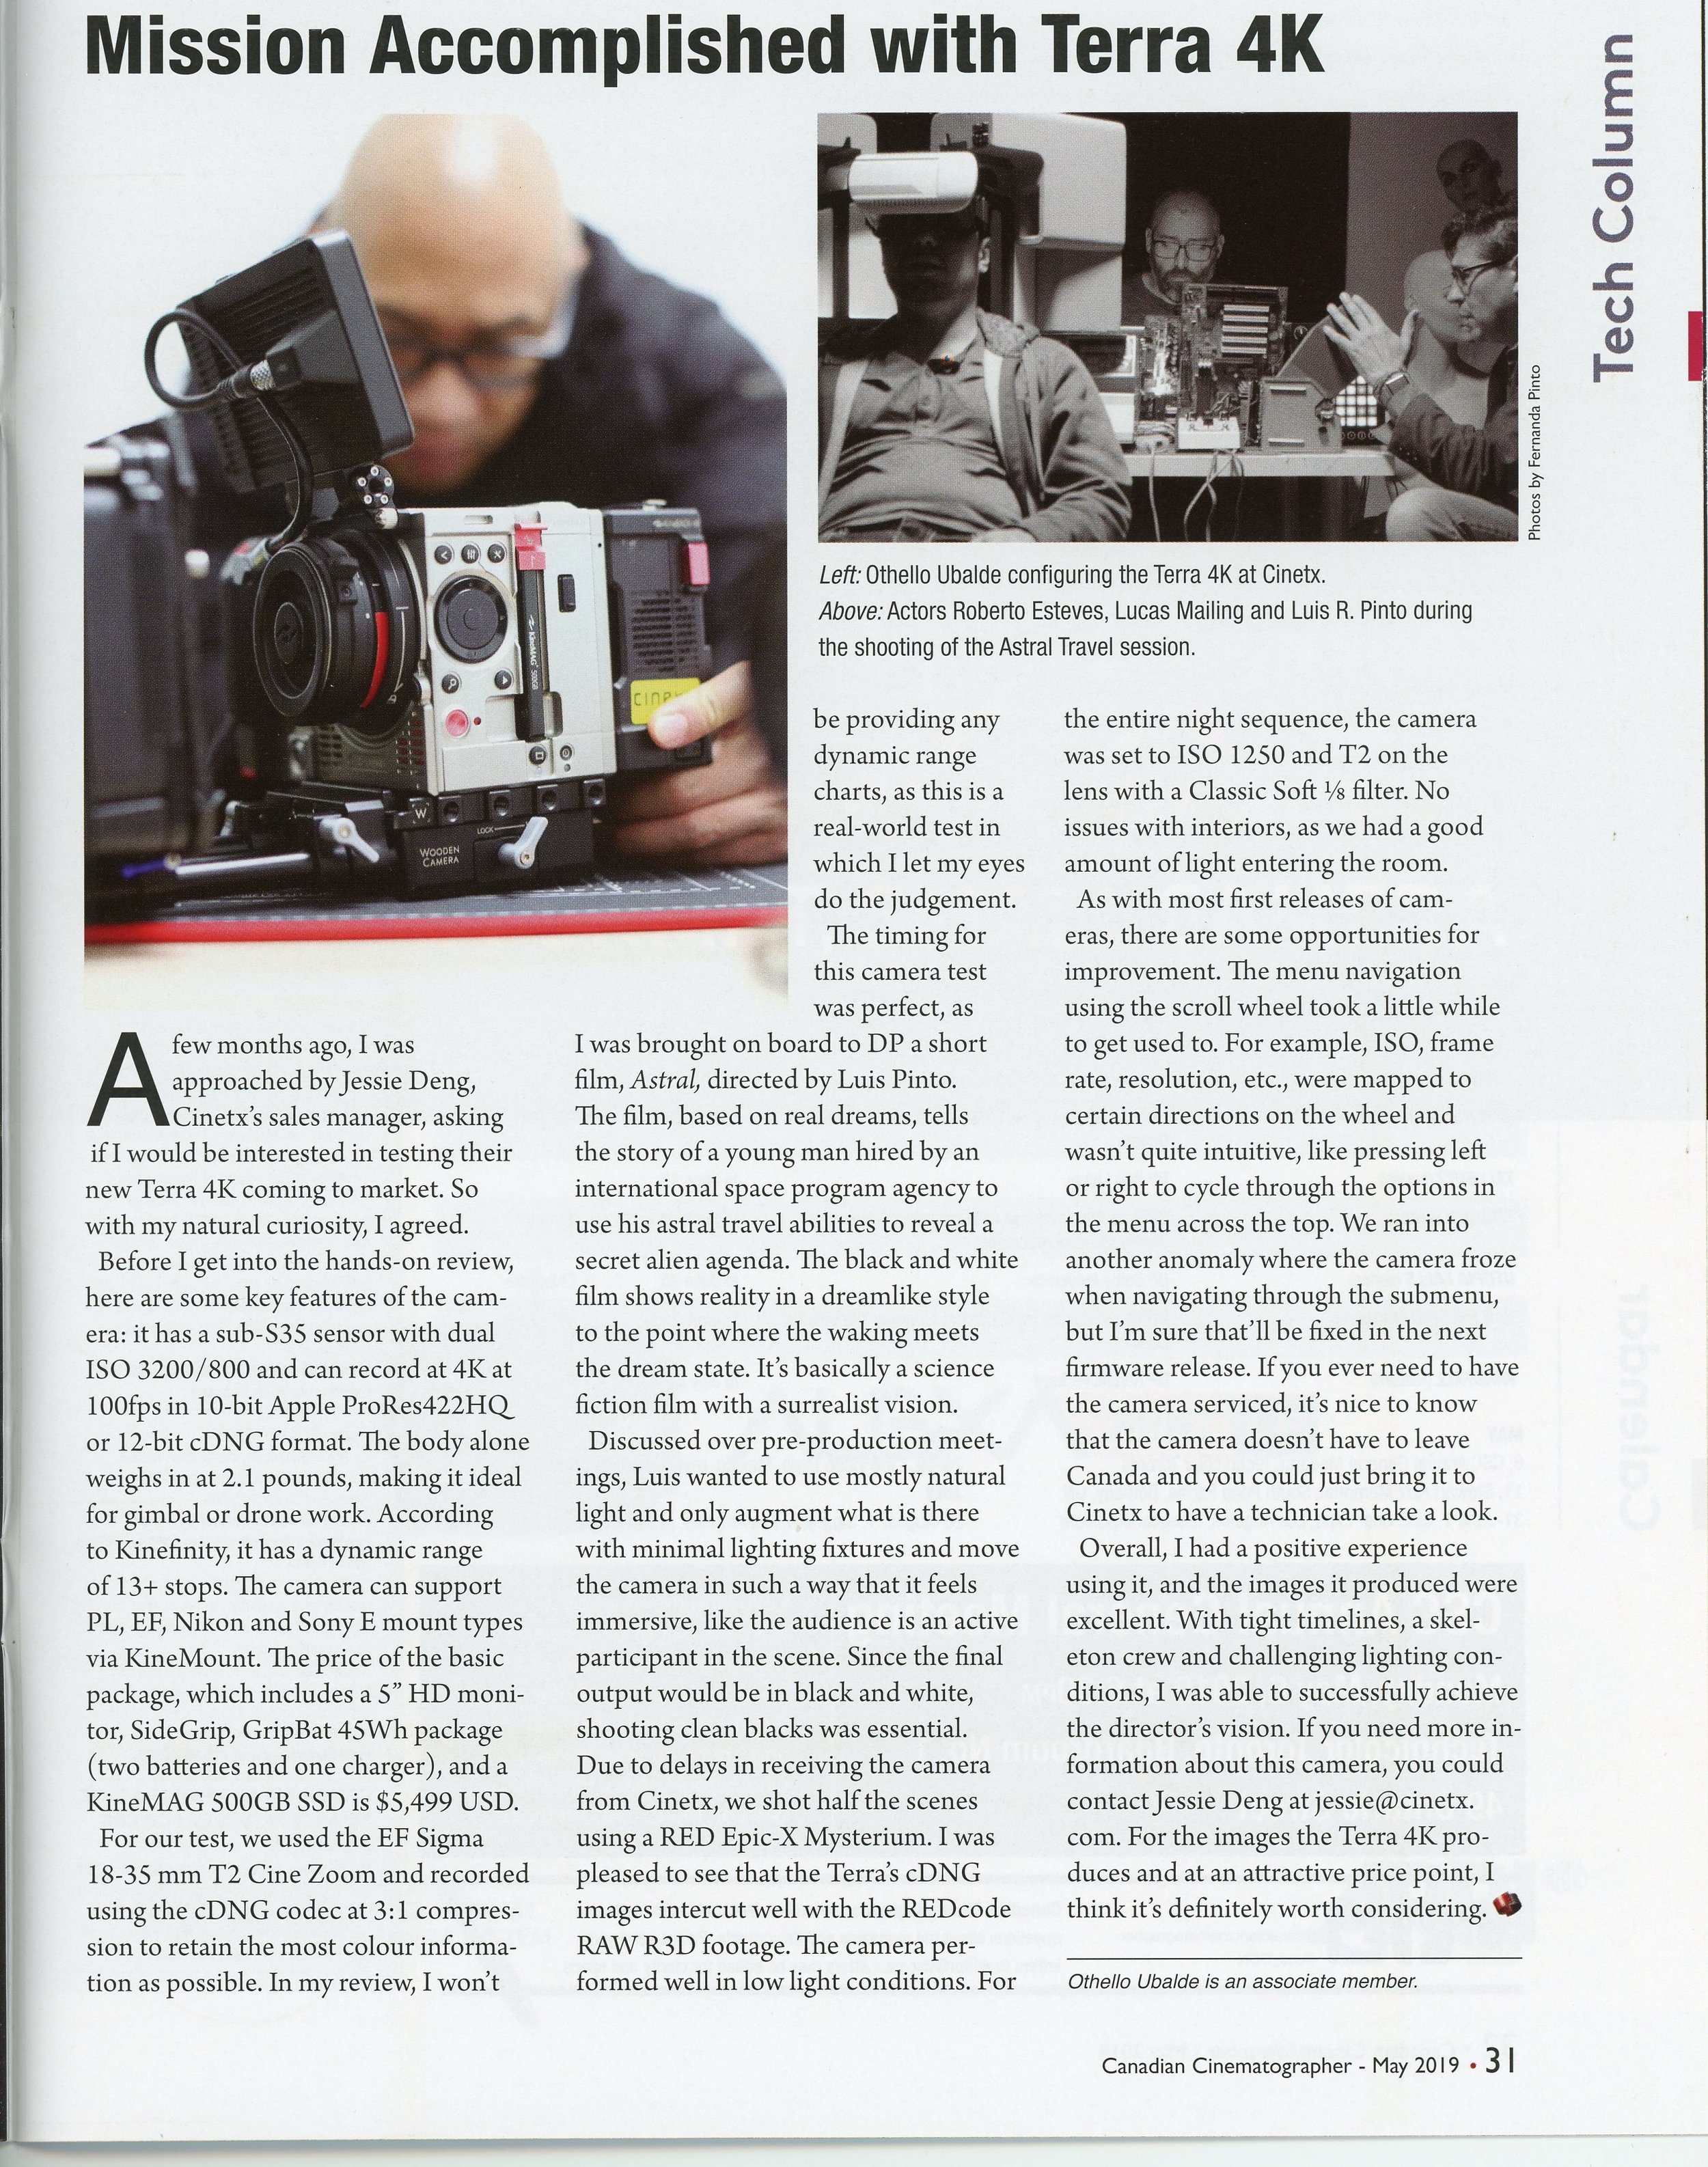 Canadian Cinematographer, May 2019.